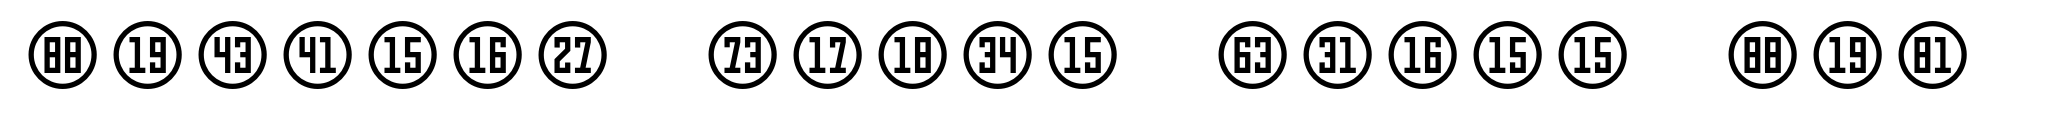 Numbers Style Three Numbers Style Three Circle Positive image